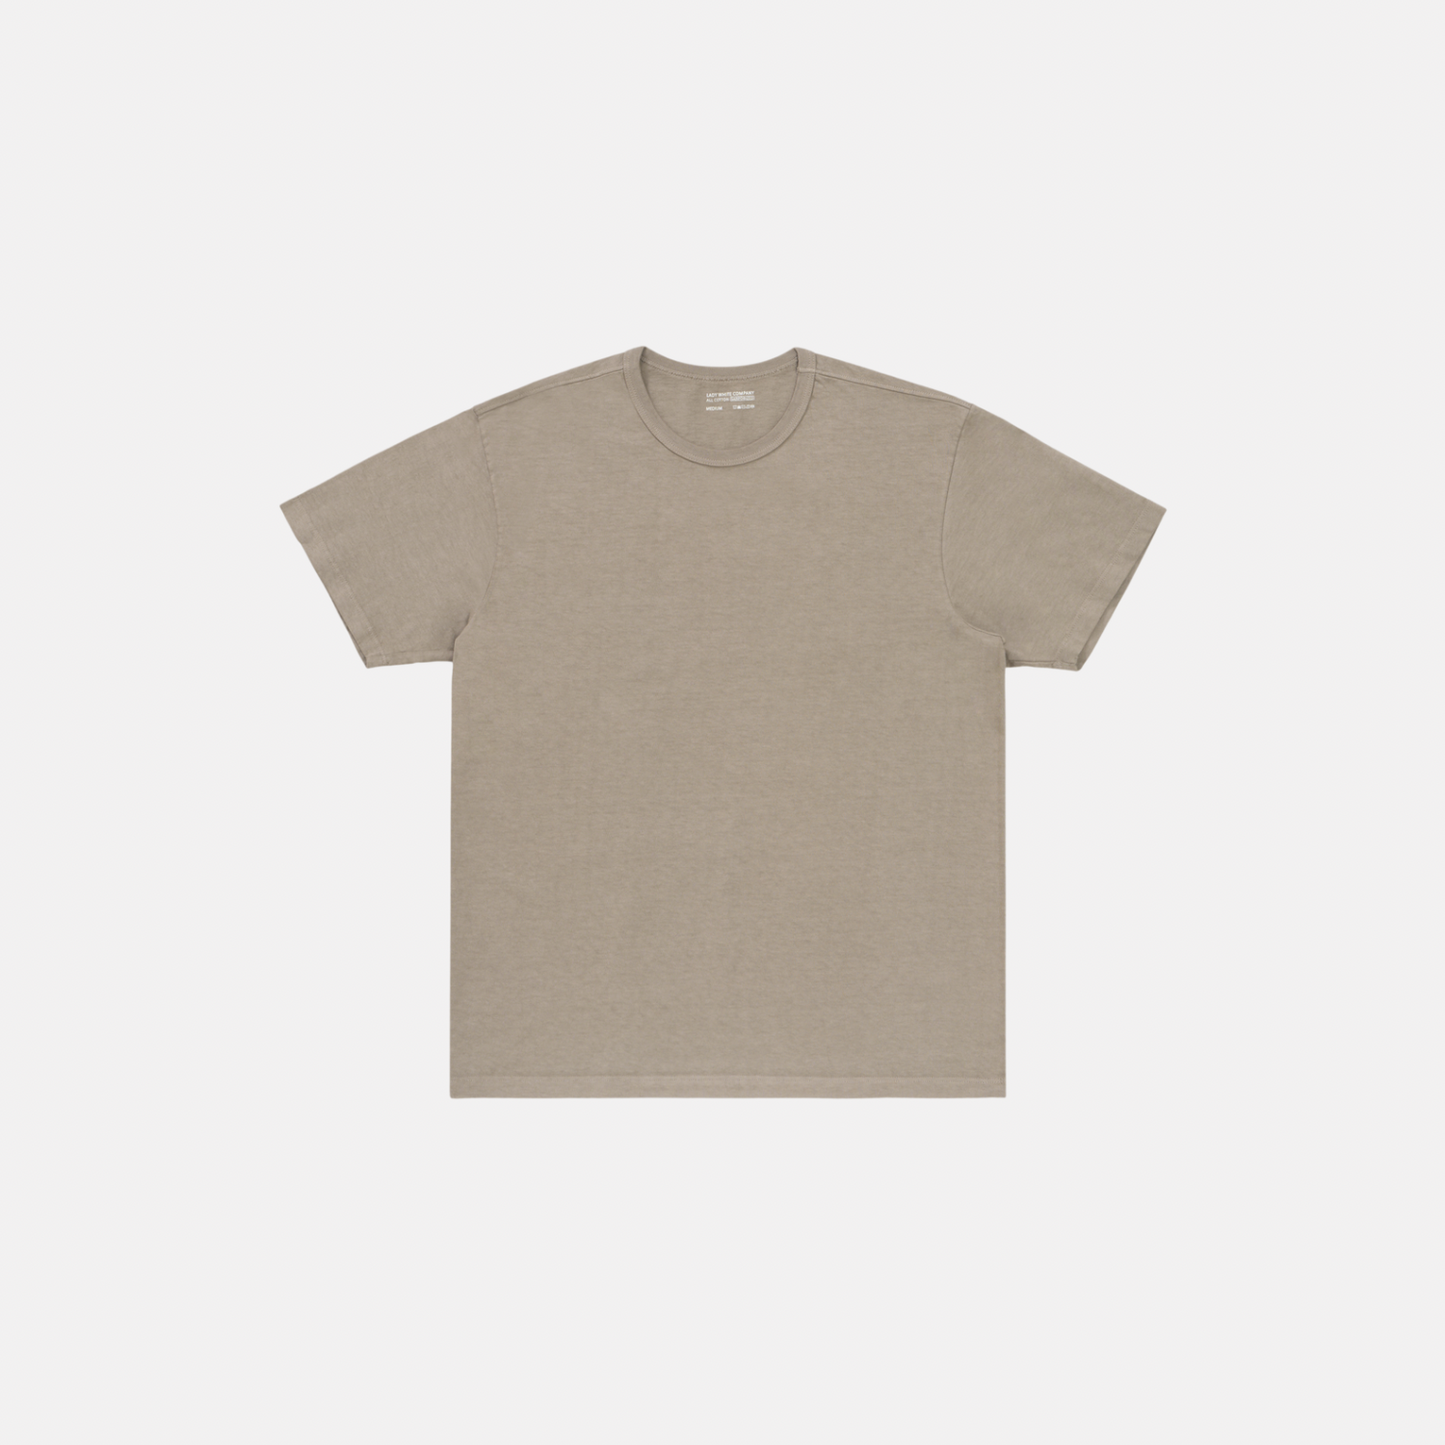 Lady White Co. Our T-Shirt - Almond LW101